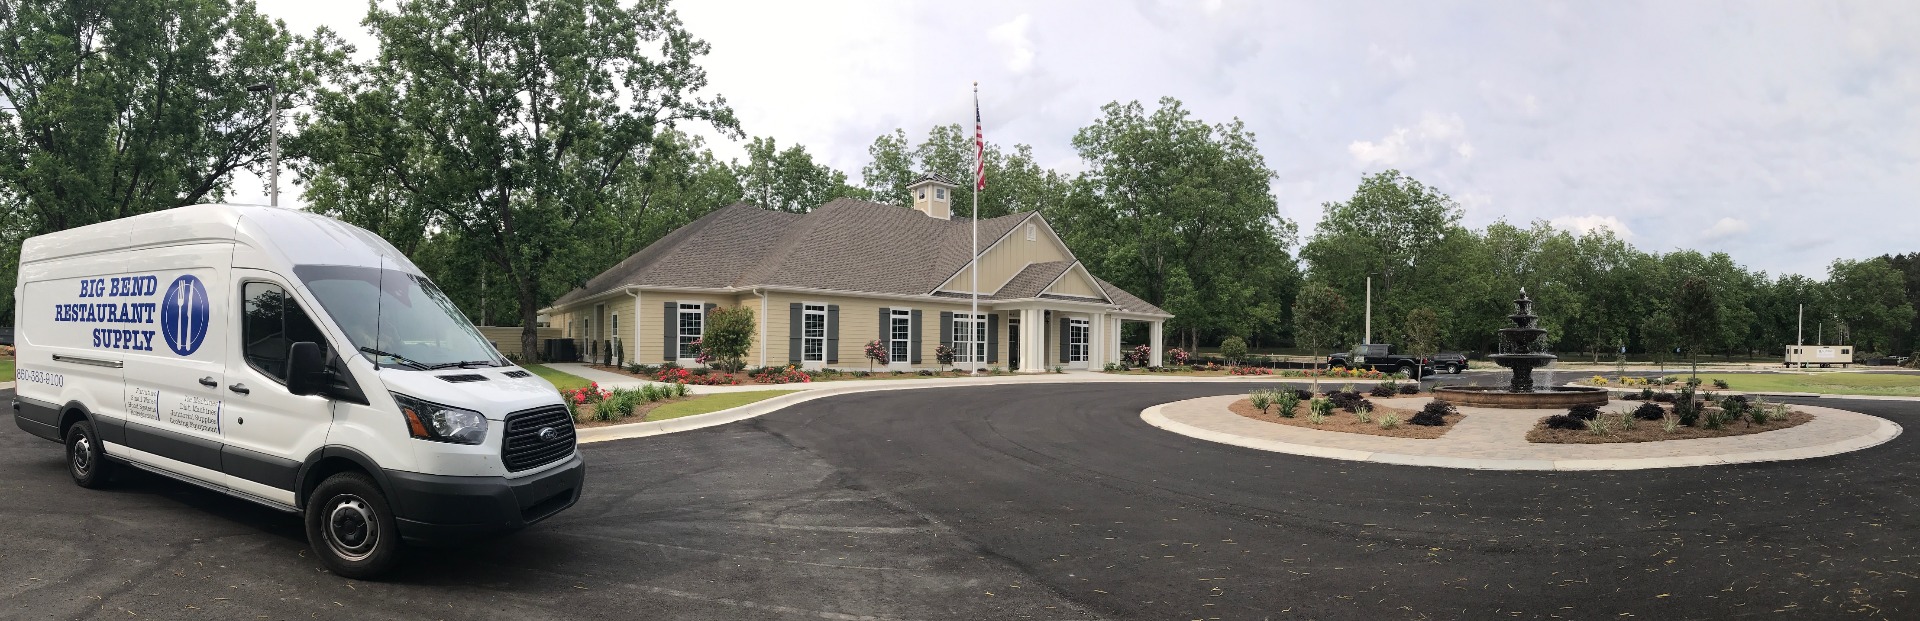 Orchard Stone Assisted Living